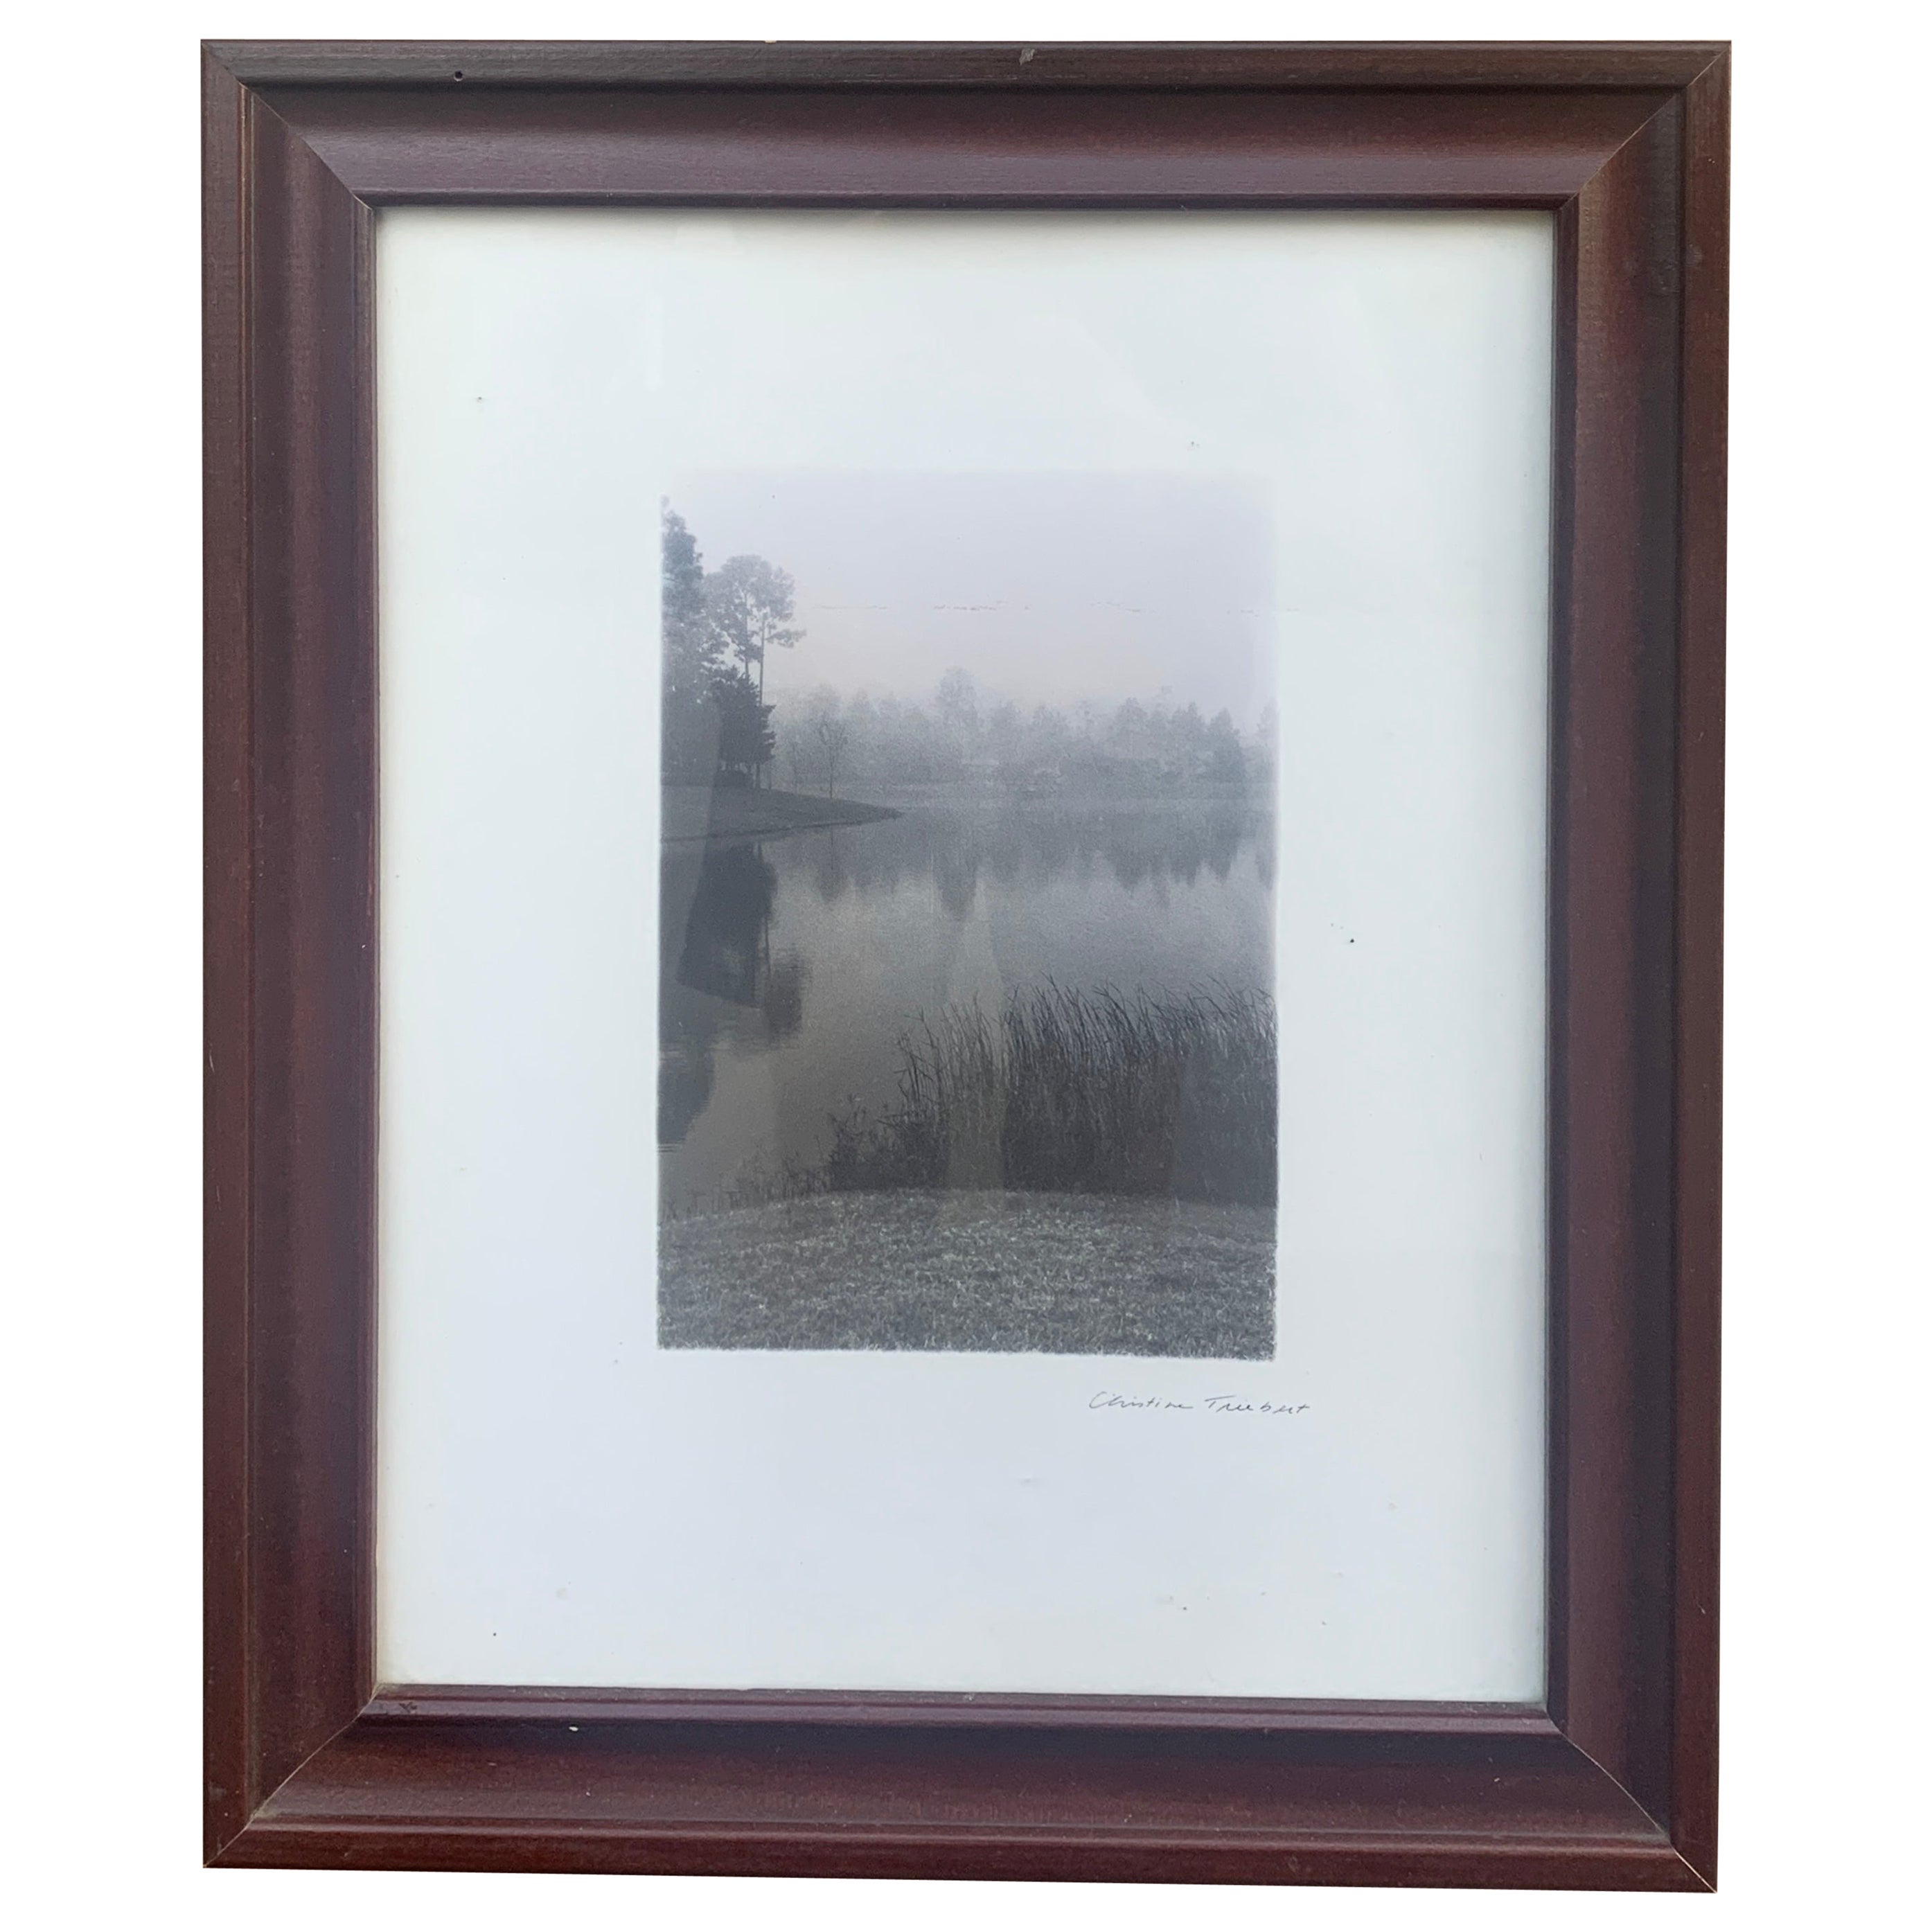 Framed Print of a Foggy Landscape by Christine Triebert, 1990s For Sale